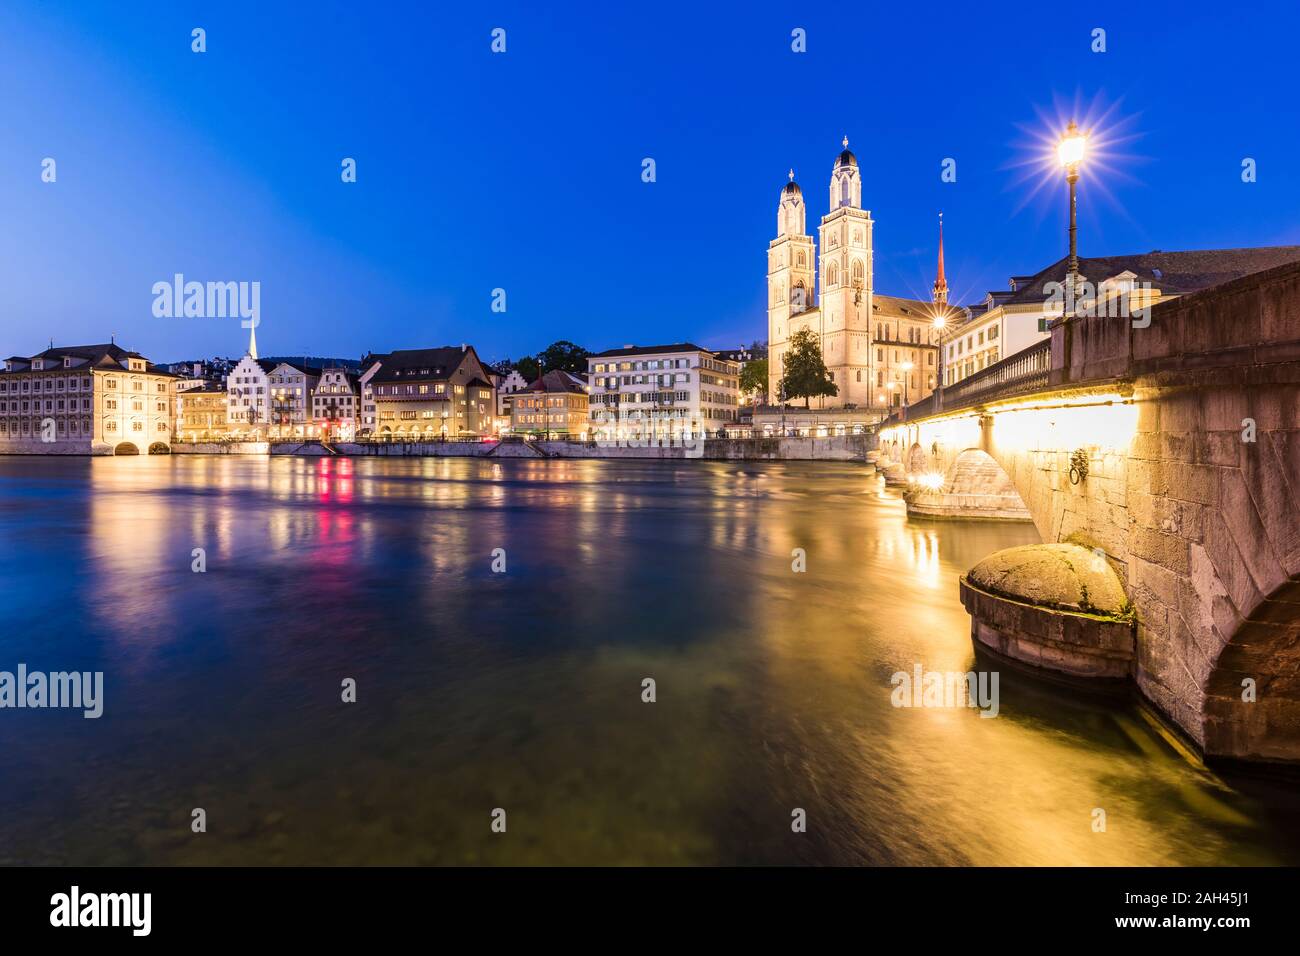 Switzerland, Canton of Zurich, Zurich, River Limmat, Munsterbrucke and old town buildings along illuminated Limmatquai street at dusk Stock Photo